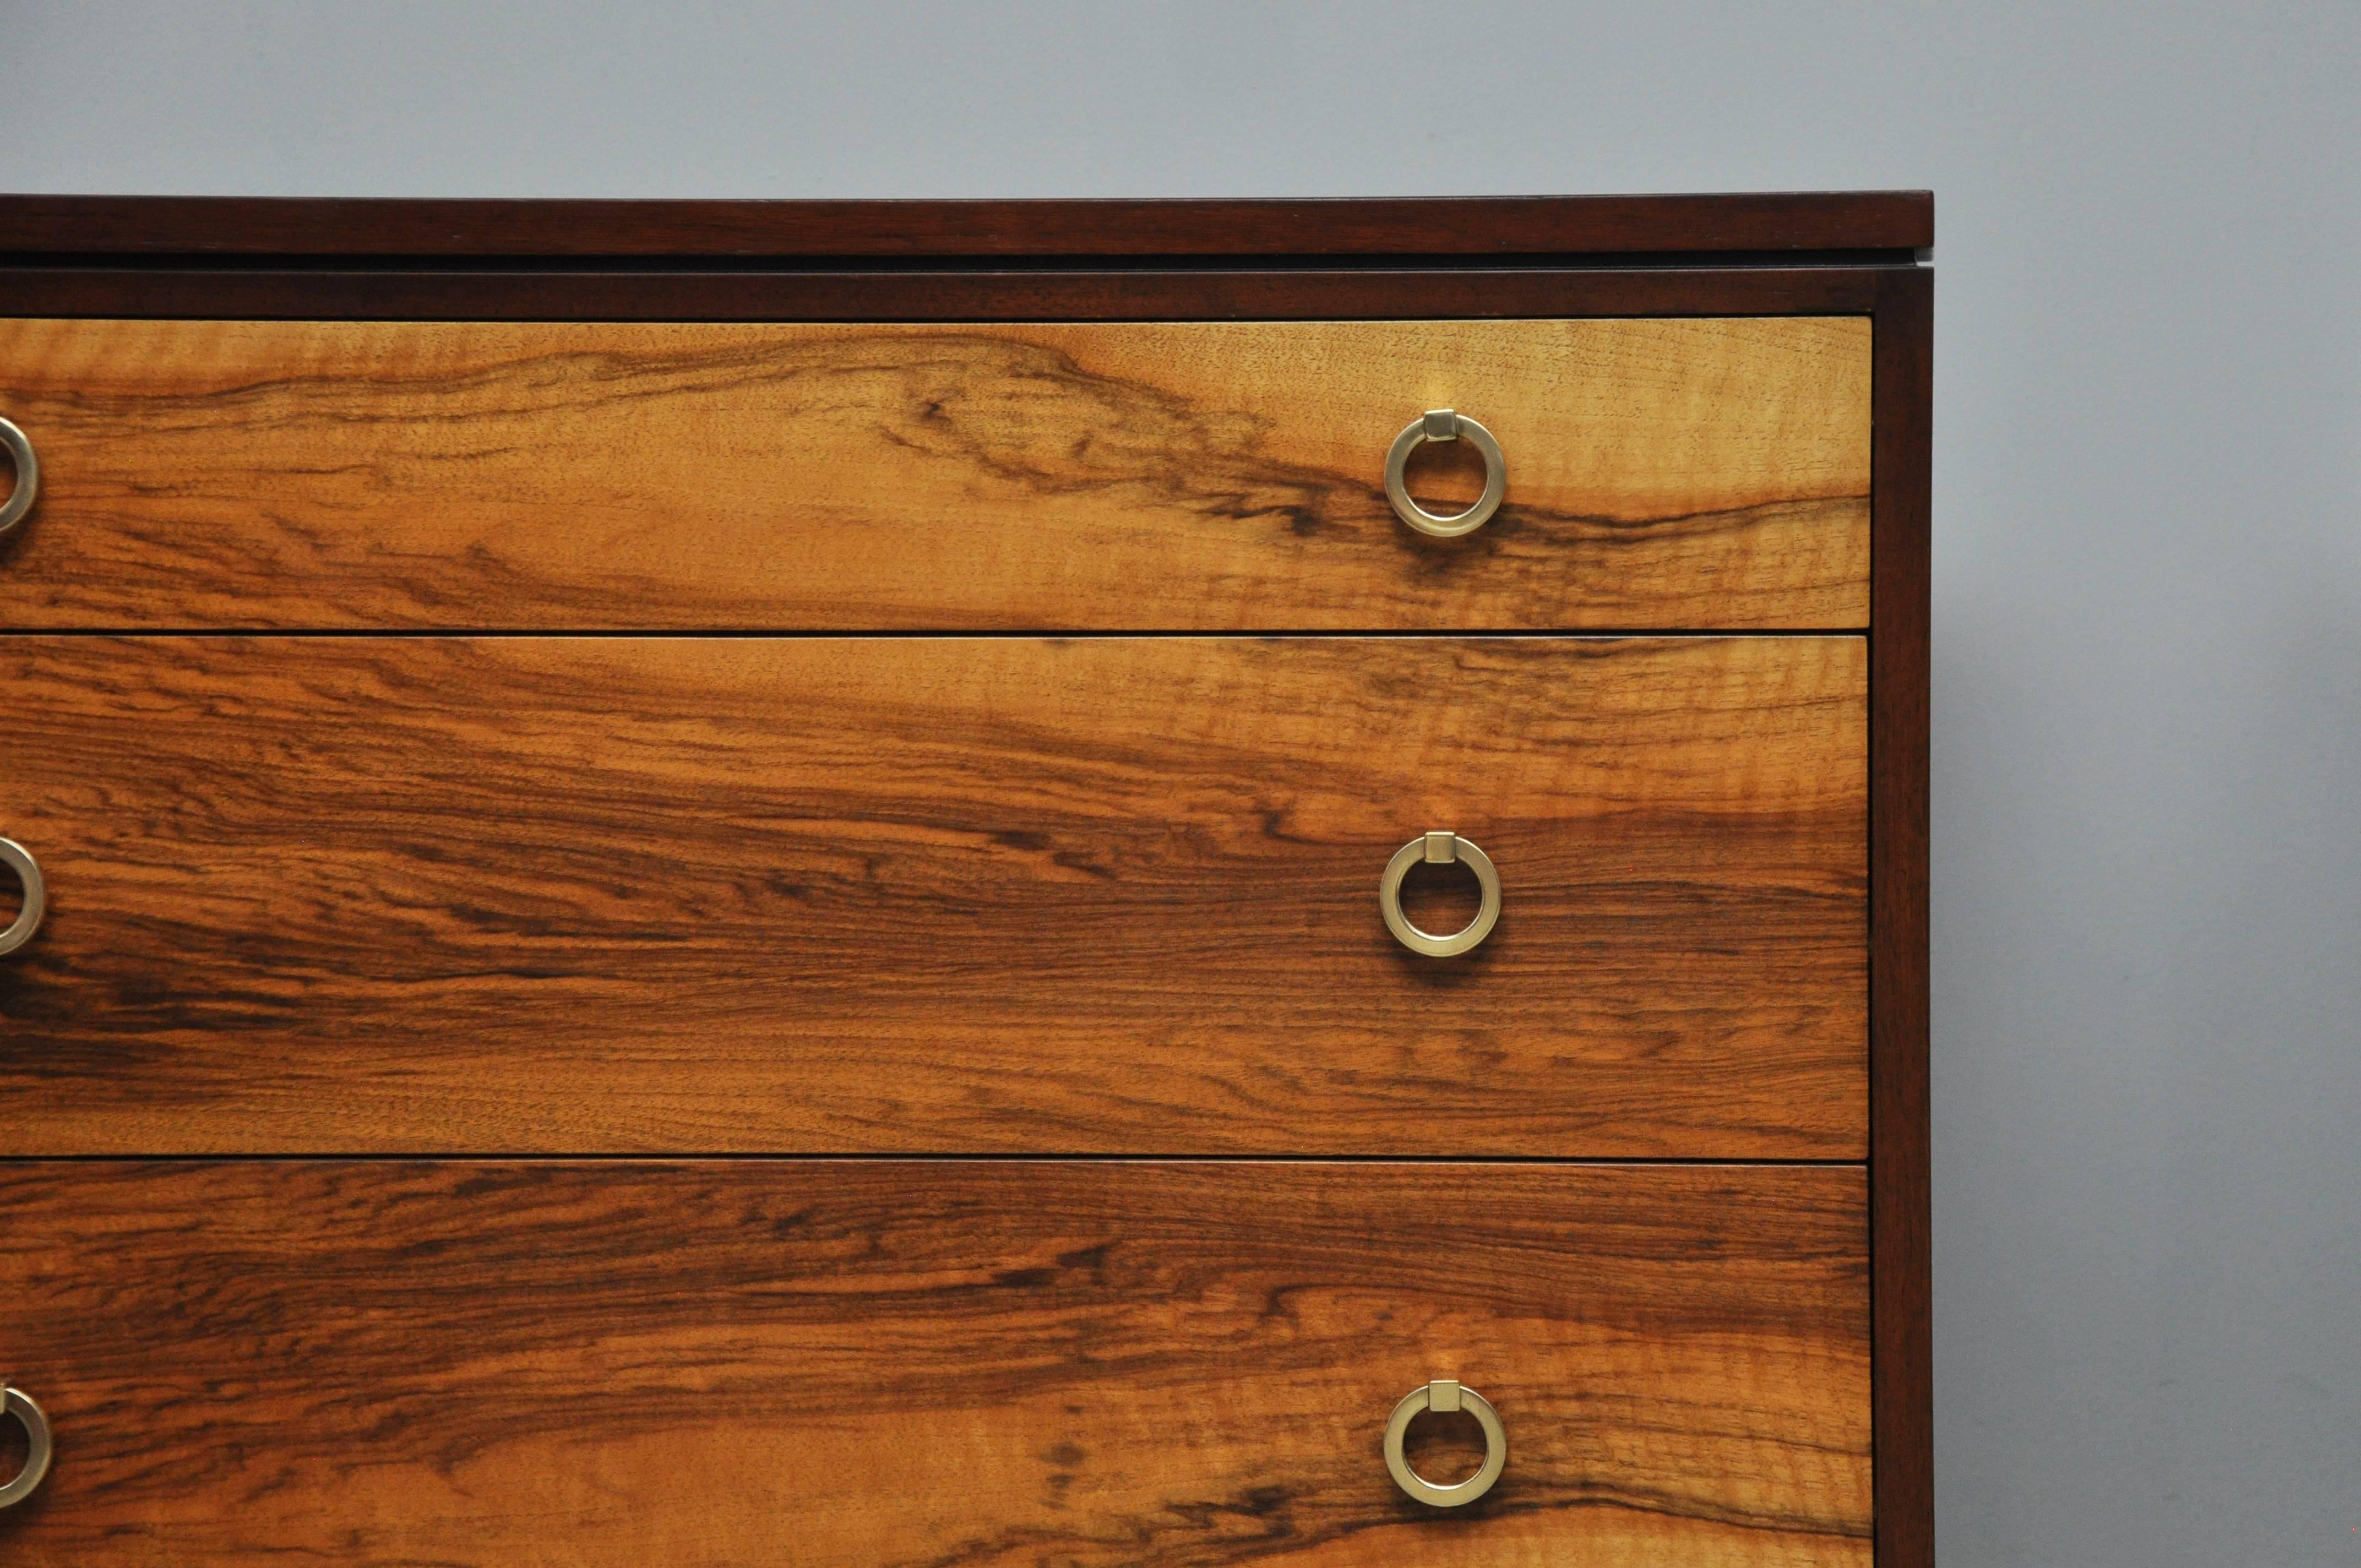 Pair of three-drawer chests by Edward Wormley for Dunbar. Model 6422. Fully restored and refinished. Dark walnut cases surround natural walnut drawer fronts with brass ring pulls.